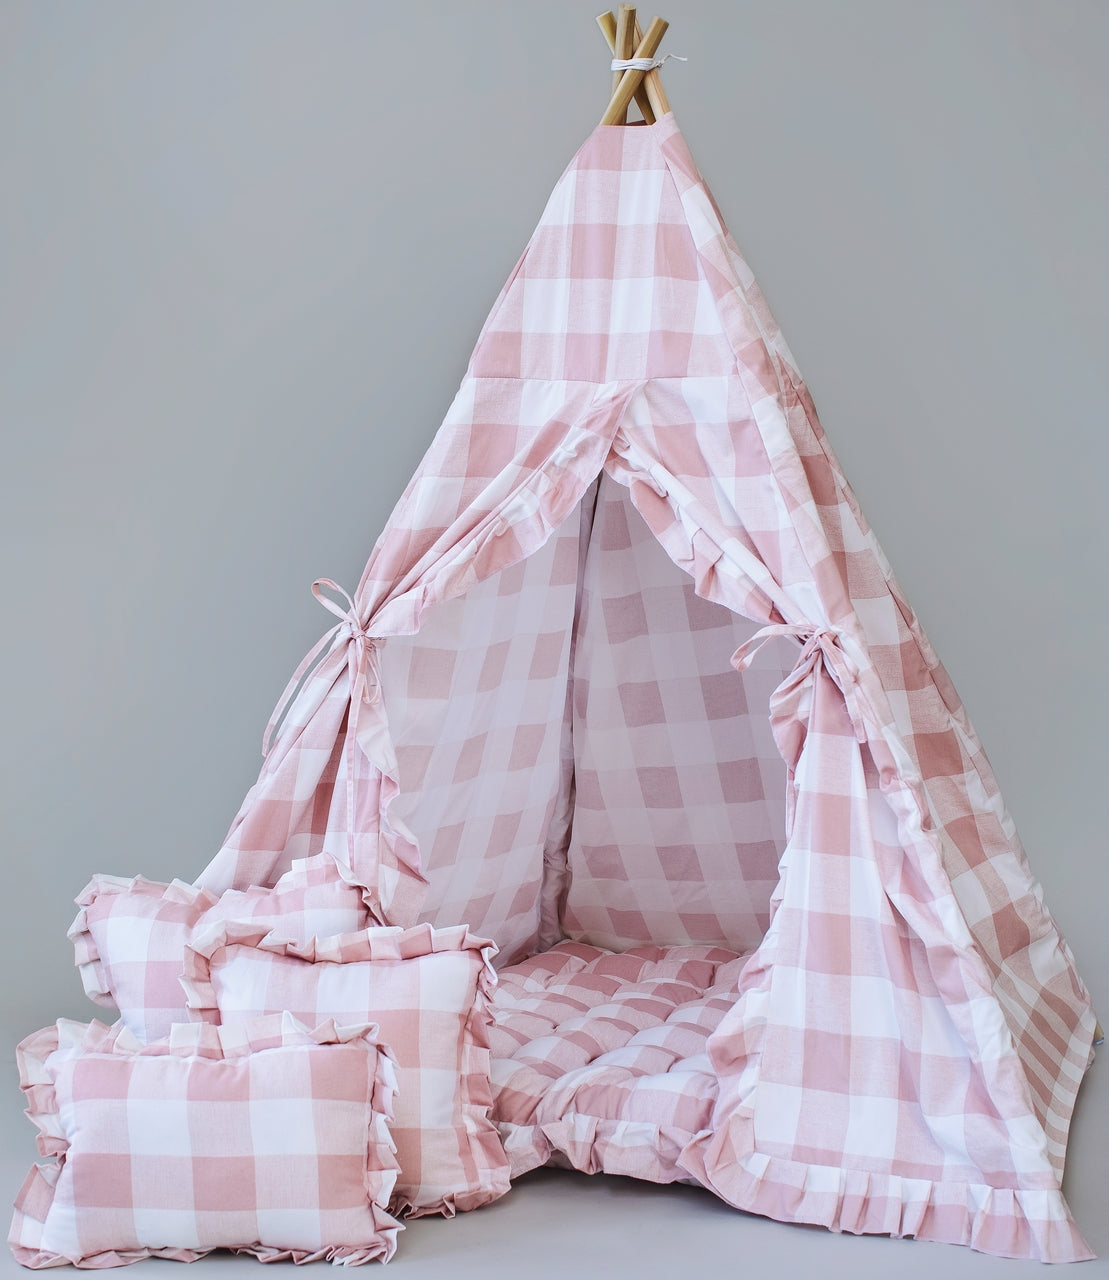 The Brandy Play Tent